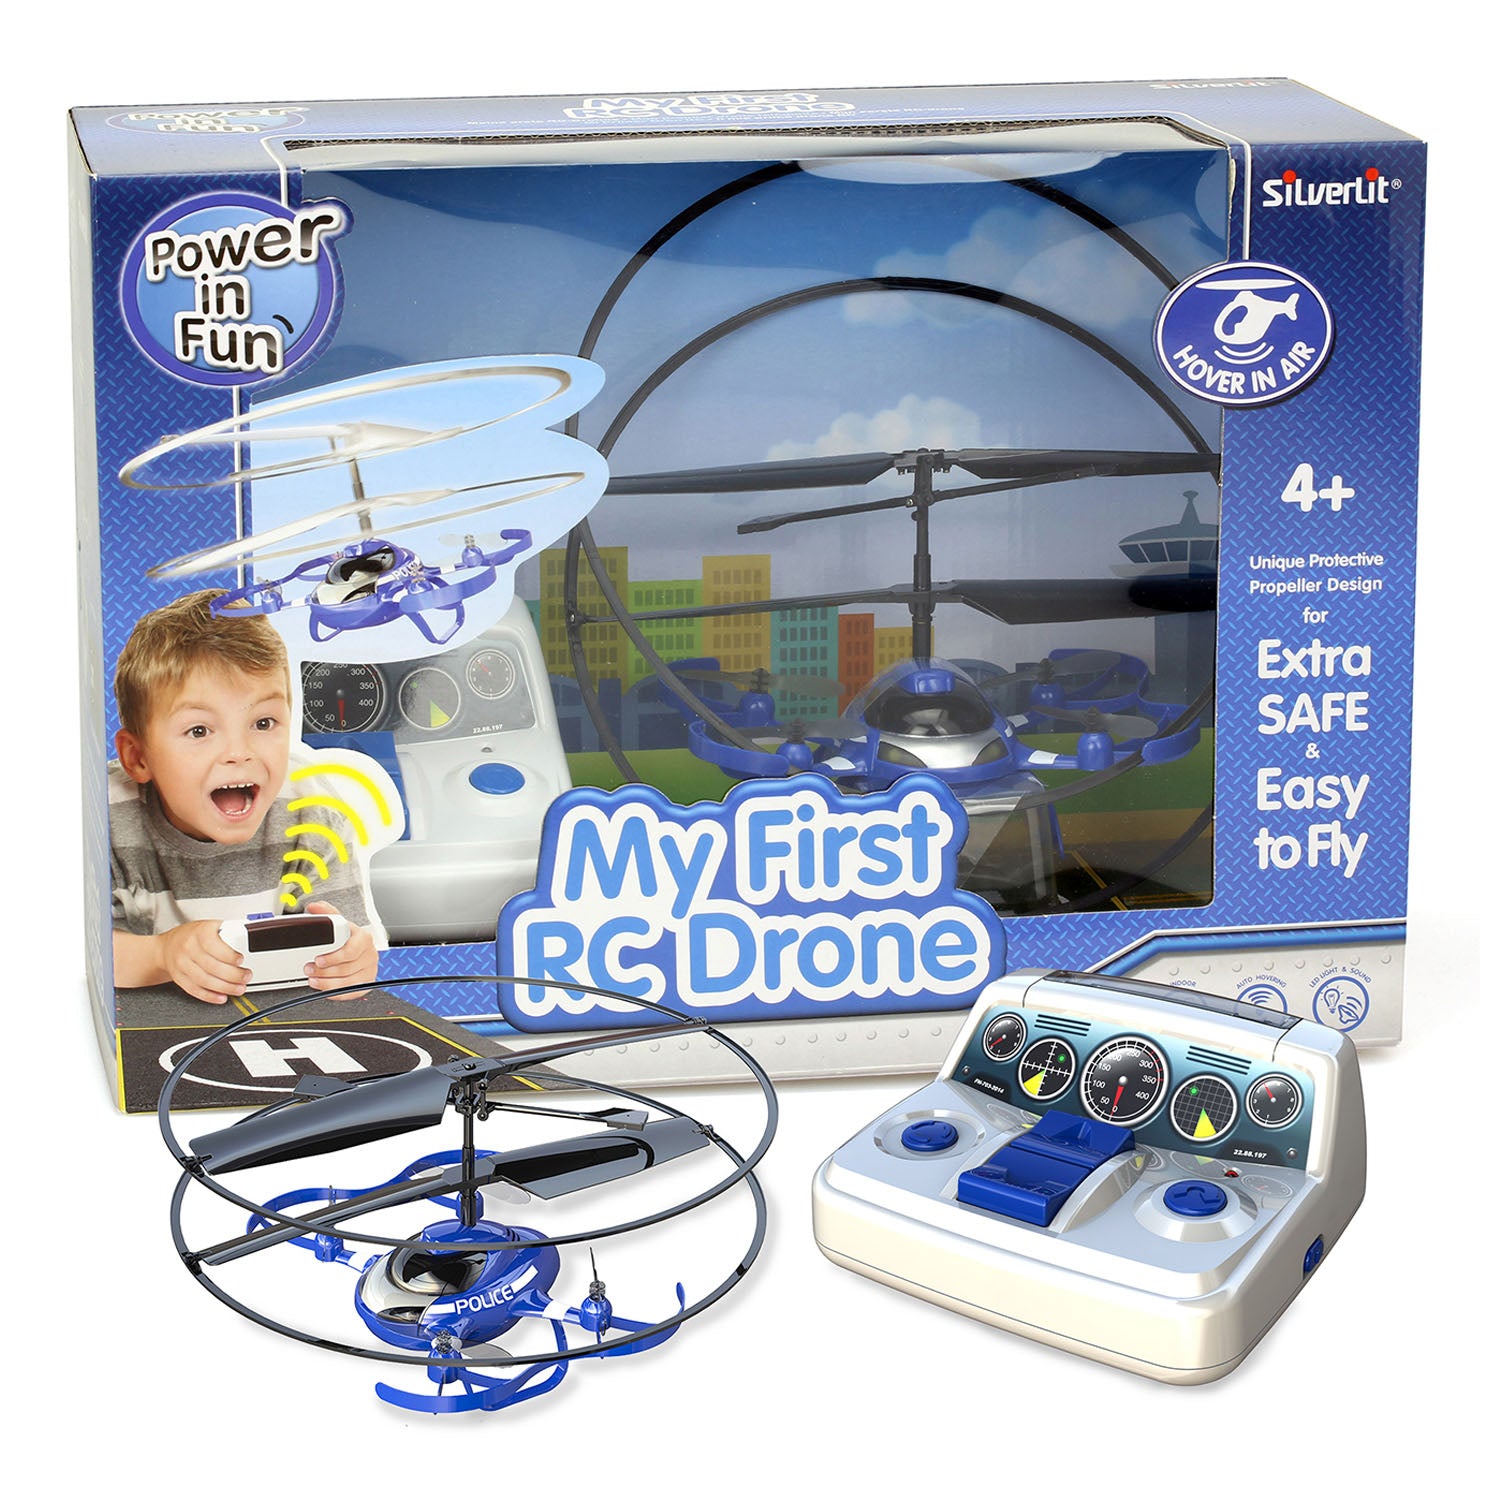 Silverlit My First Drone Toy Blue Helicopter Remote Control Chopper Control Kids